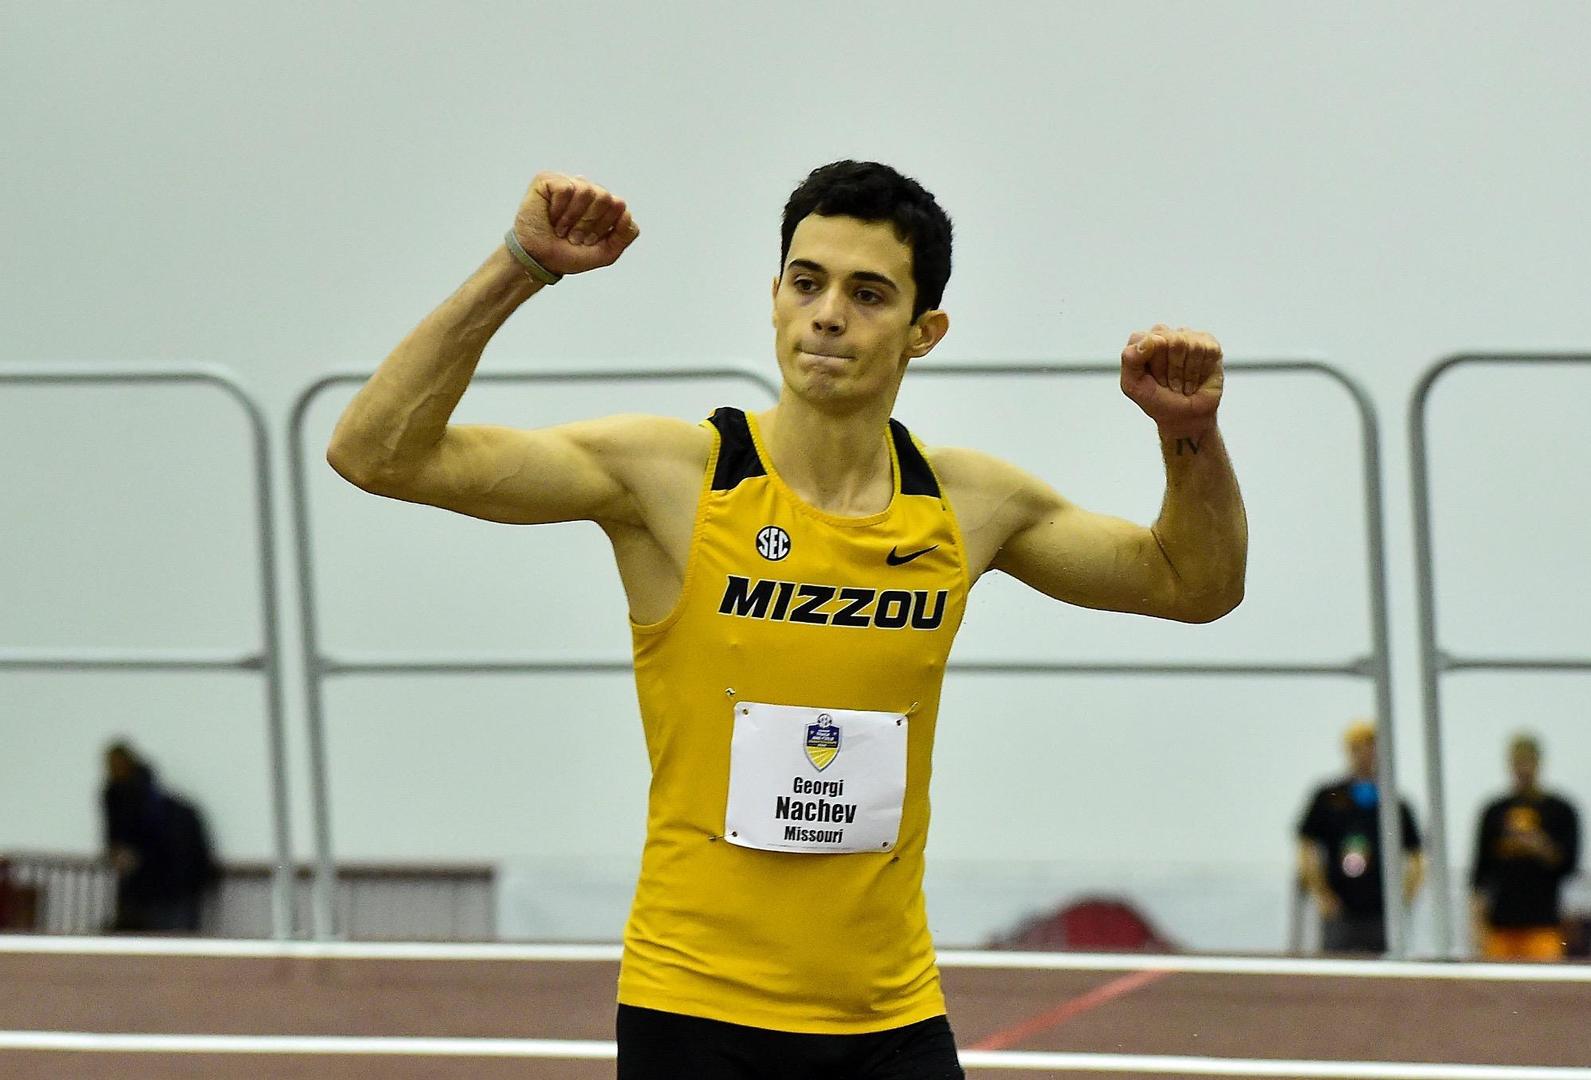 Georgi Nachev
Mizzou Tigers at SEC Indoor Championships in College Station, TX. on Saturday, February 26, 2022. 
(Photo by Jeff Curry)